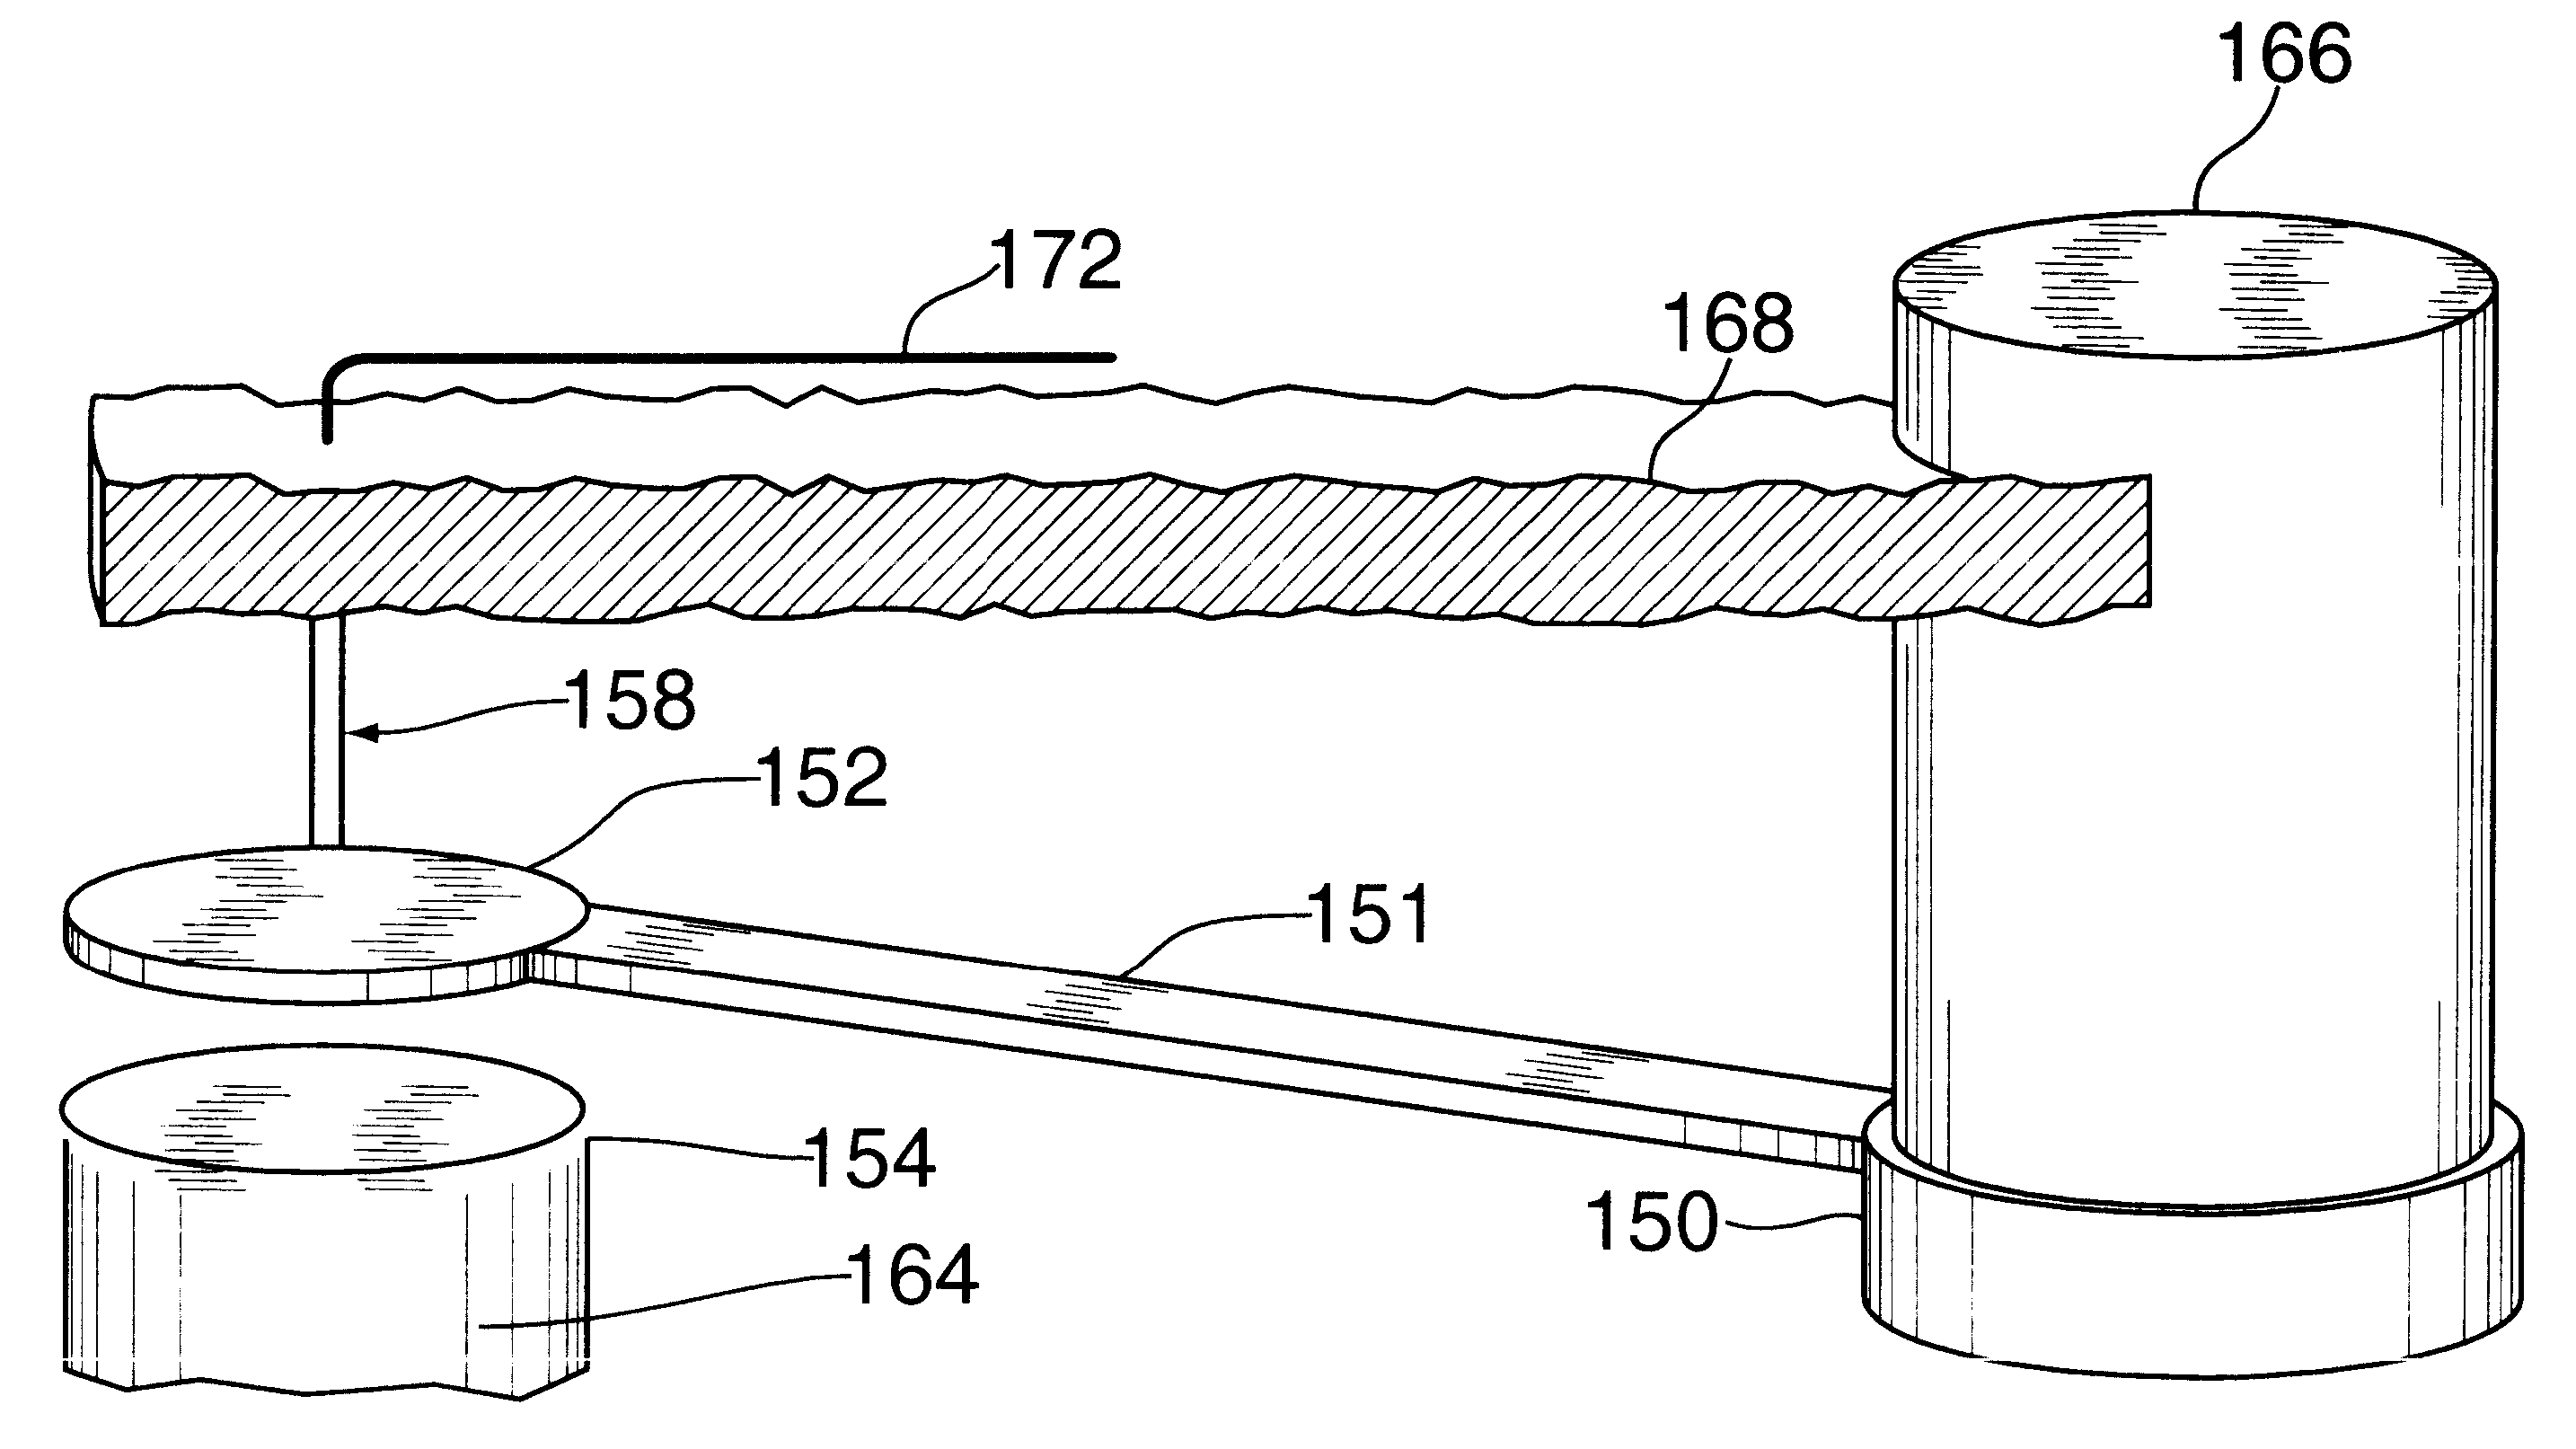 Dynamic alloy wire valve for a multimedia linked scent delivery system